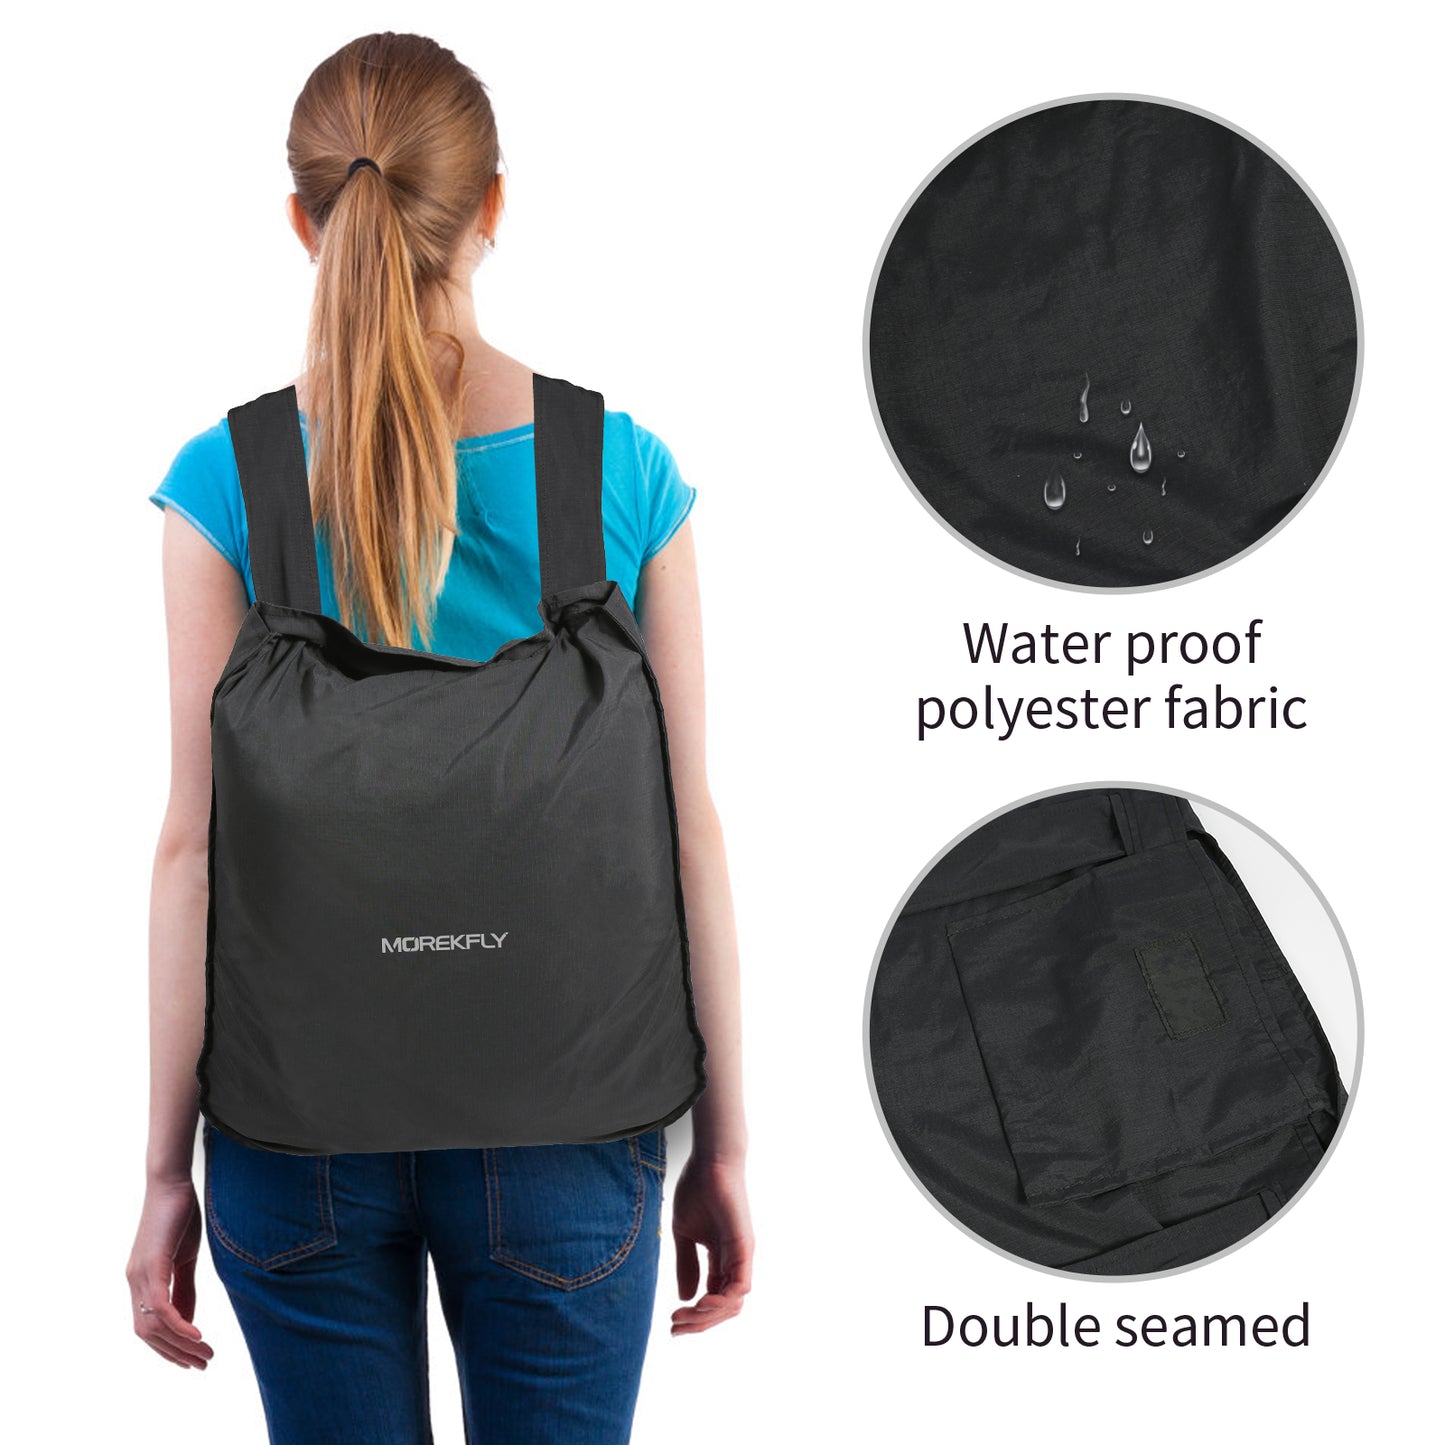 Black backpack for shopping grocery bags large size shopping bag packable fits in Pocket reusable bag for purse reusable grocery bags printed backpack for grocery shopping Lightweight Heavy Duty& Durable Eco Friendly